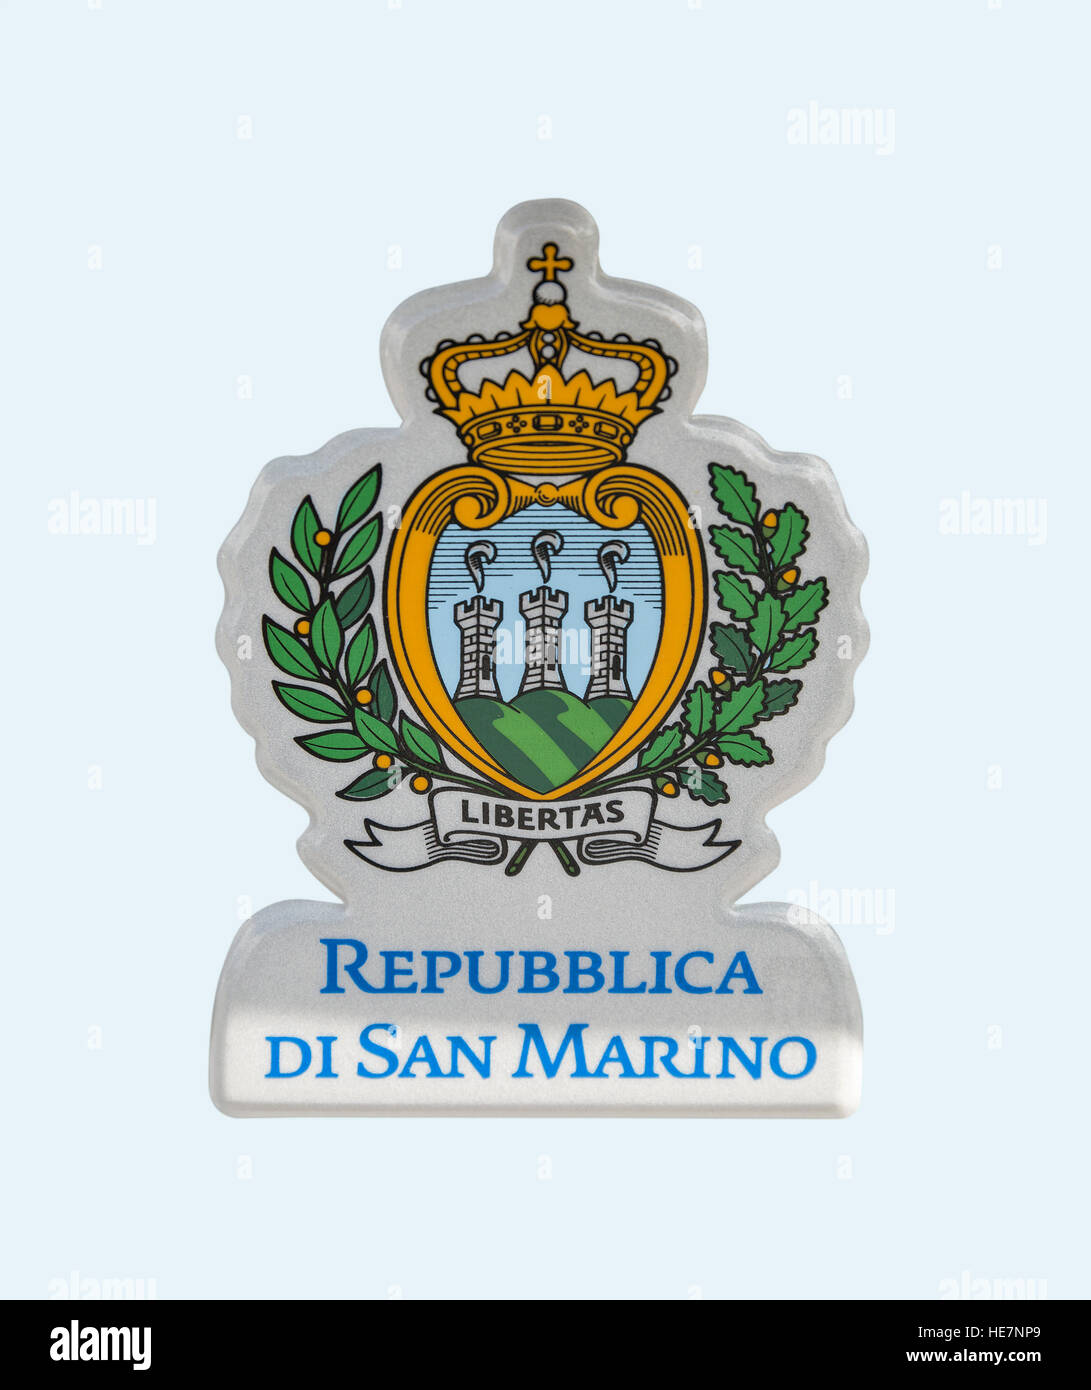 Republic of San Marino Coat of Arms from car vehicle registration plate isolated on white background. Stock Photo